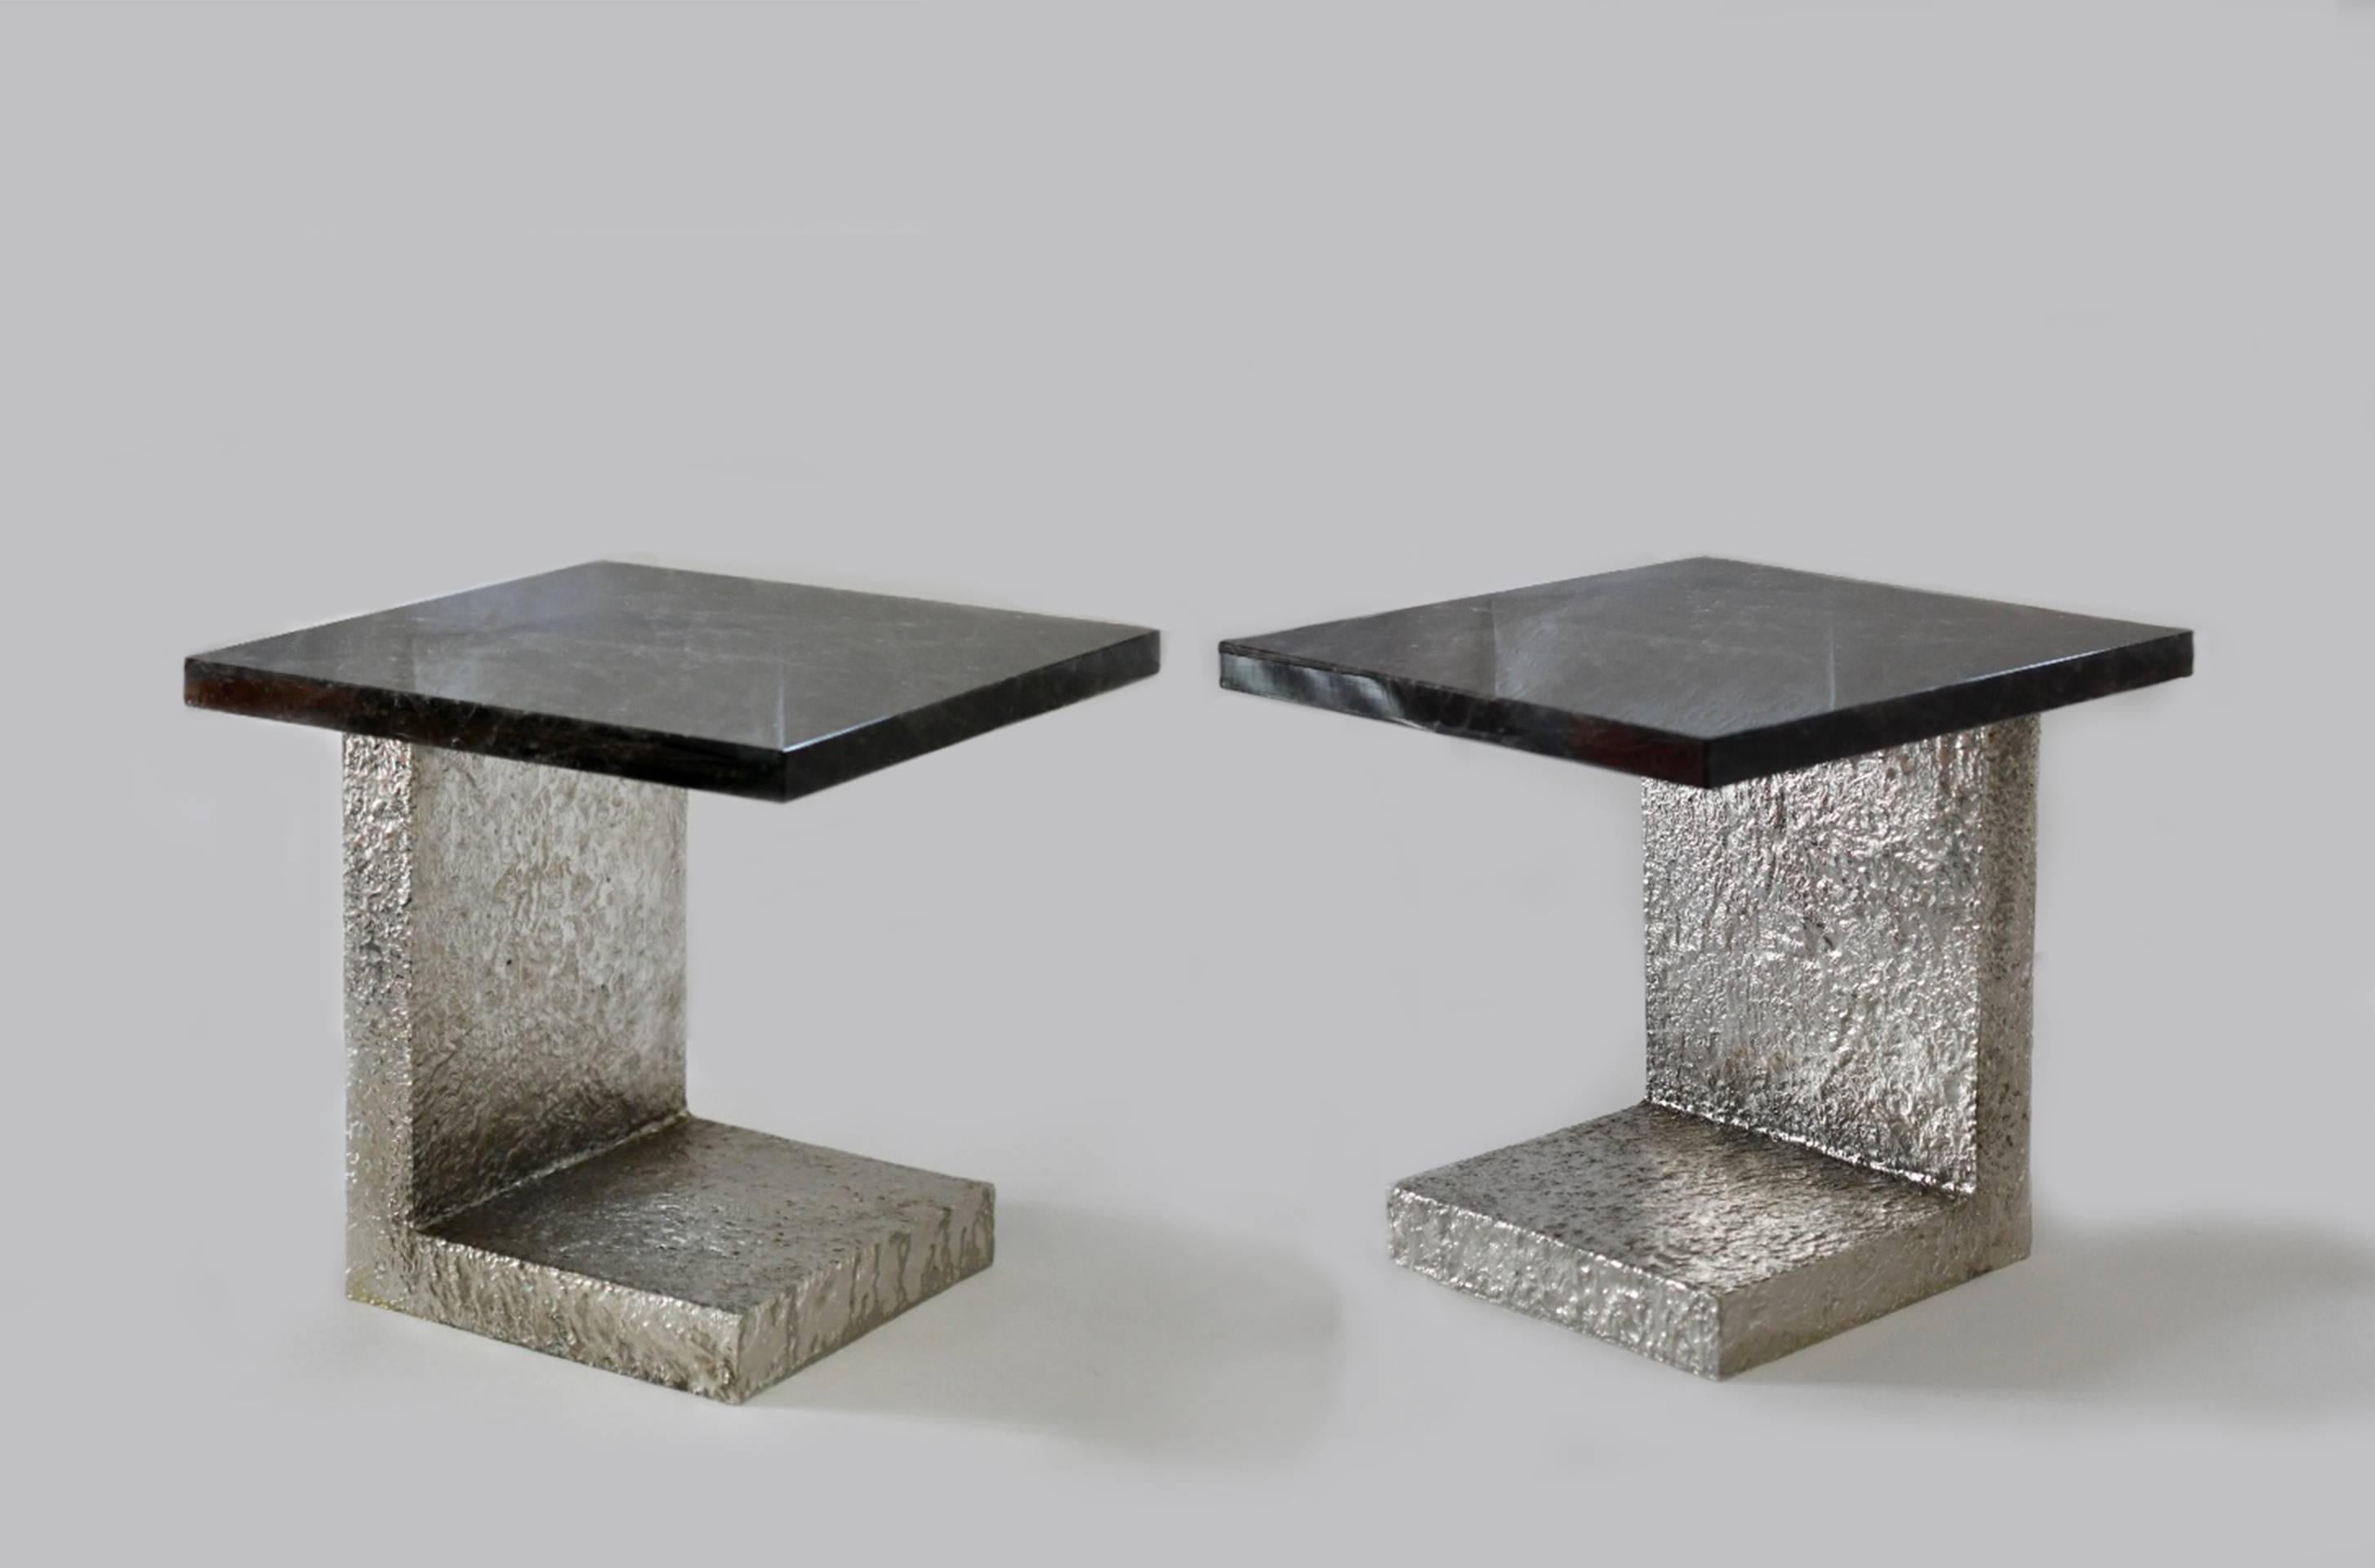 Pair of luxury smoky dark rock crystal quartz side table with nickel plating brass base, created by Phoenix Gallery (NYC).
Can be sold separately: $5,300 each table.  Created by Phoenix gallery NYC.
